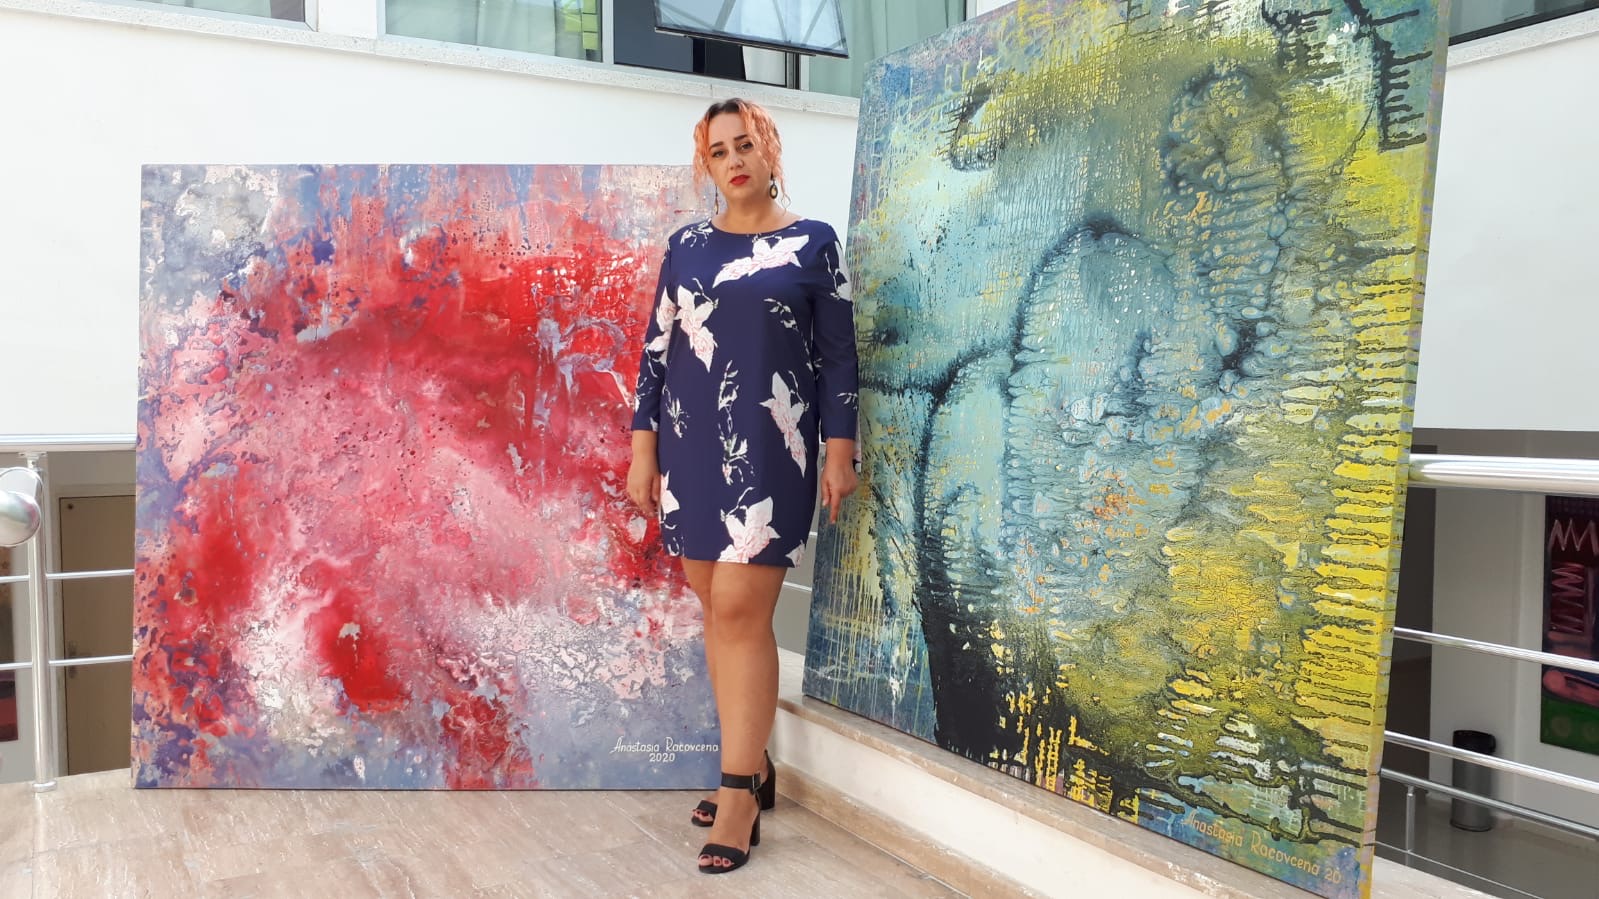 Artist Anastasia Racovcena made three artworks titled “The Coast of Music Illusions”, “Totems of the Renaissance Tribe” and “Glowing Sand with Solar Energy” for the Cyprus Museum of Modern Arts